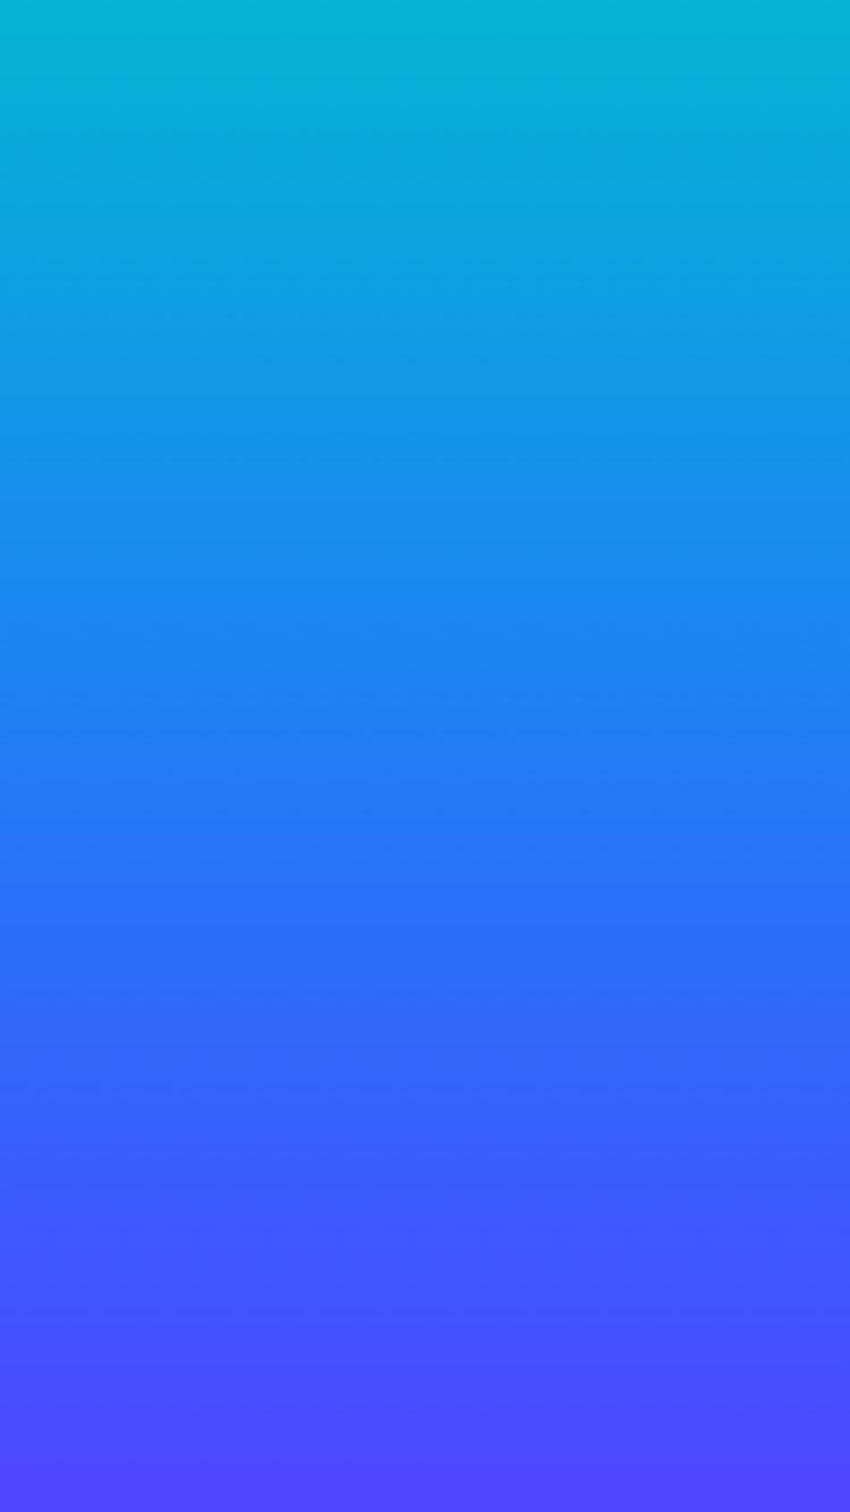 Weekend: 5 Gradient for iPhone 6 and iPhone 5s, iphone 5c HD phone wallpaper